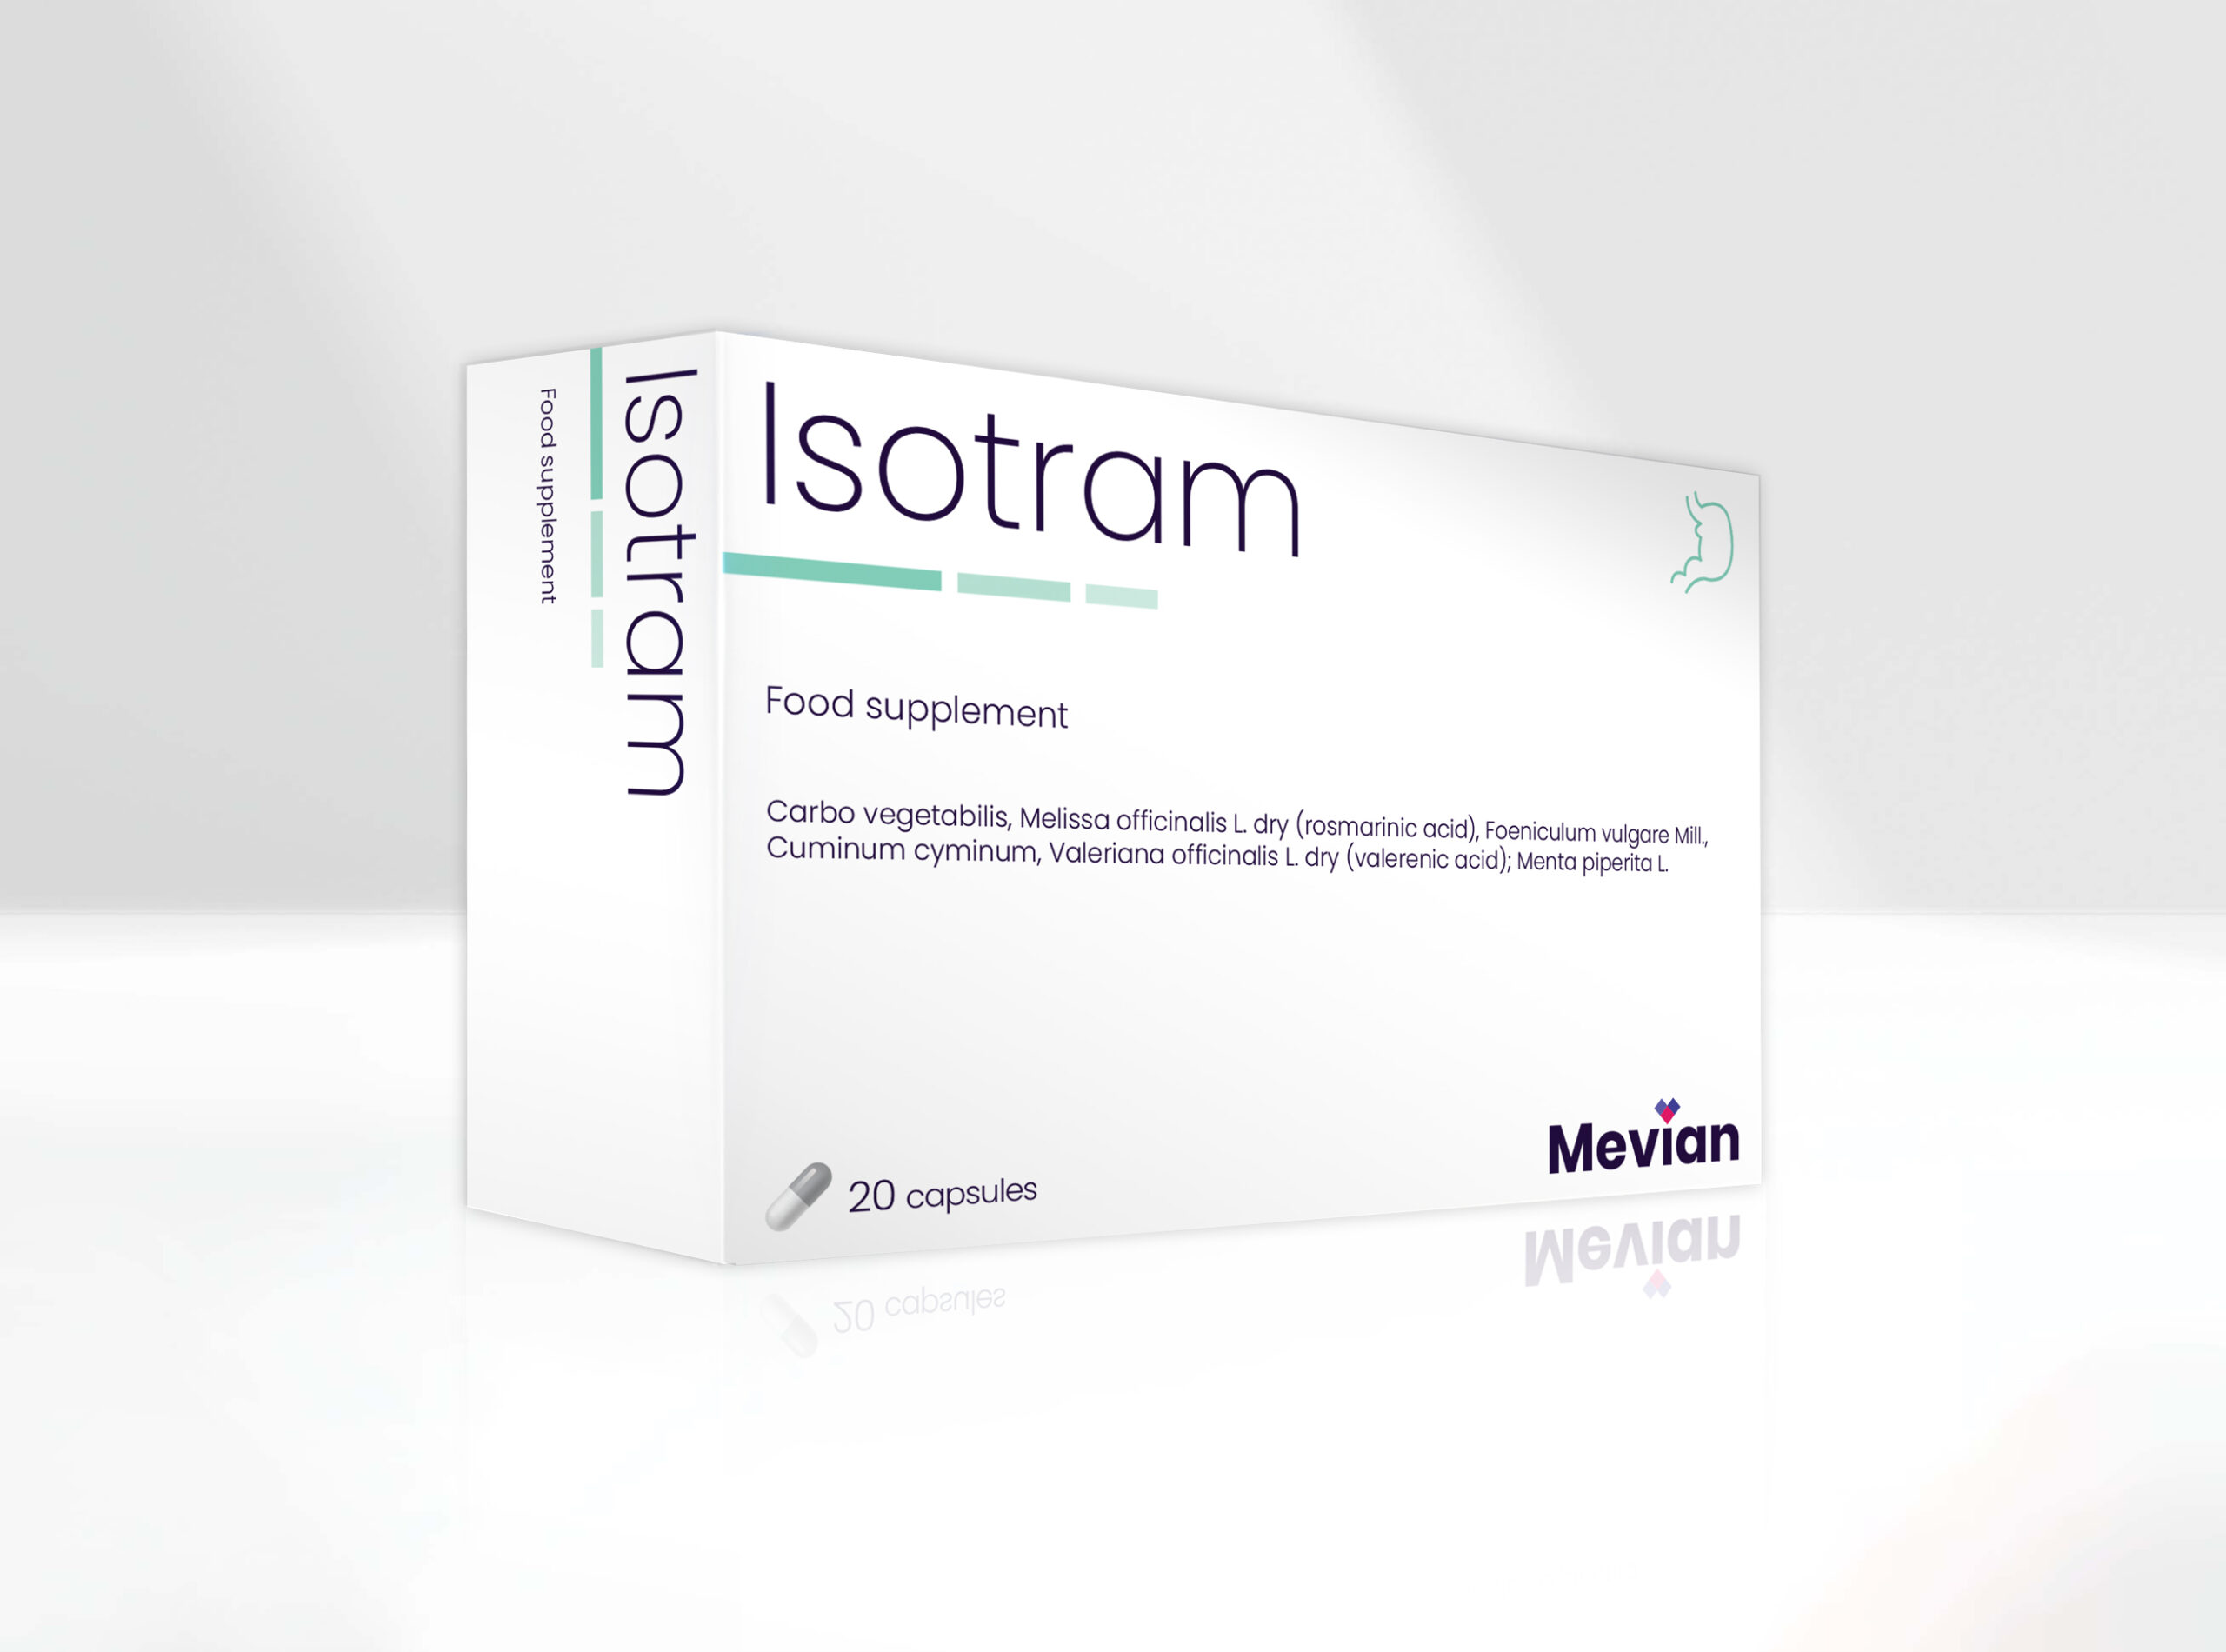 Isotram supports the good function of gastrointestinal motility while providing the elimination of gas.